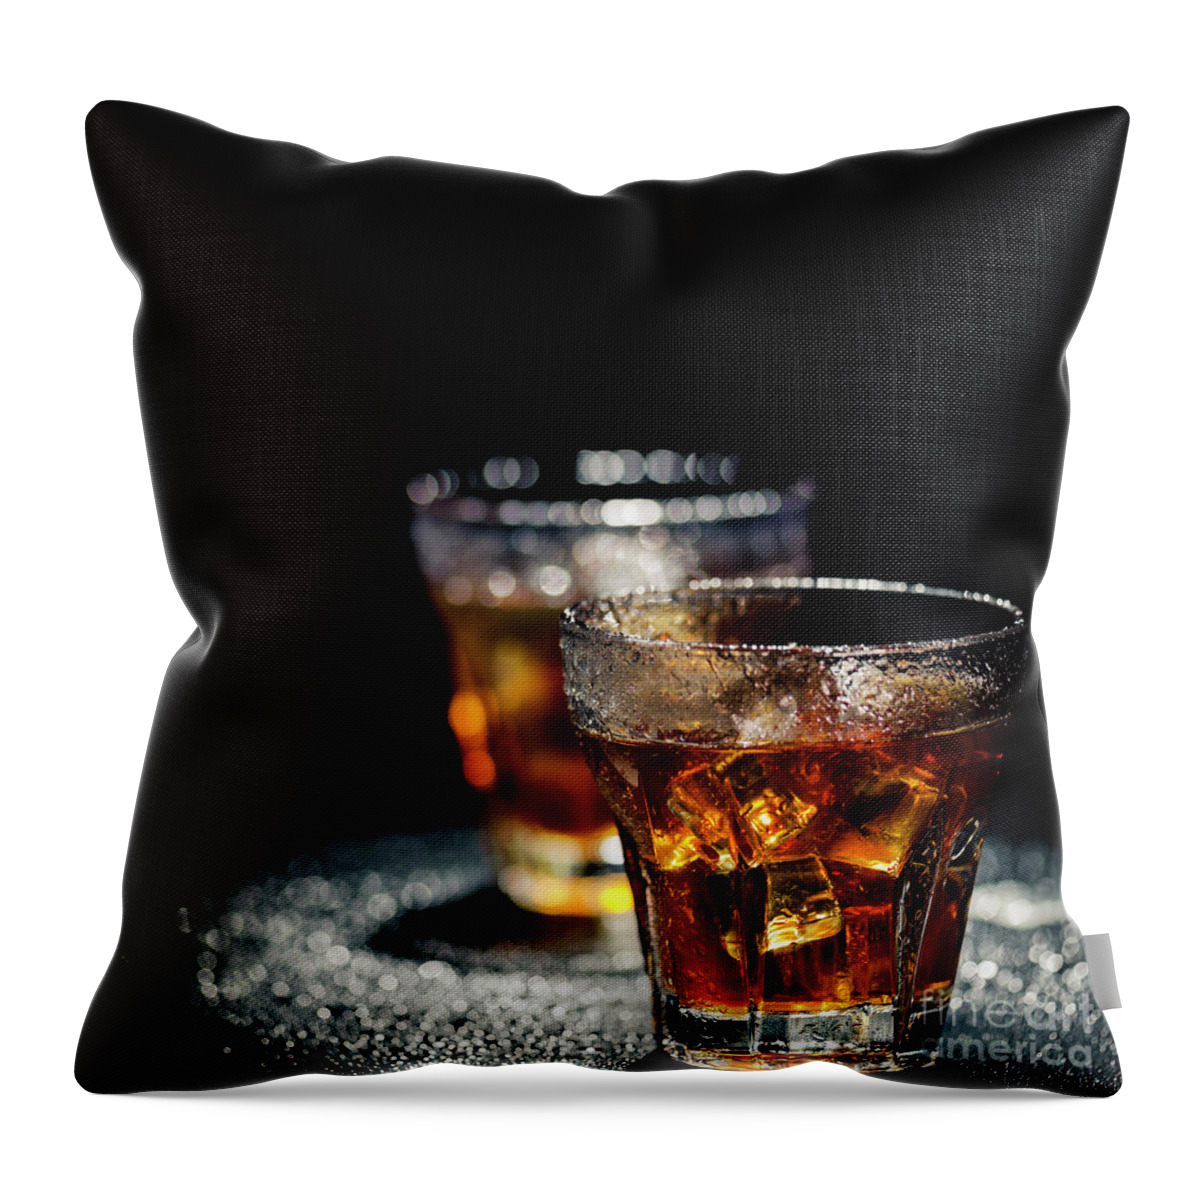 Whiskey Throw Pillow featuring the photograph Iced Cocktails by Jelena Jovanovic